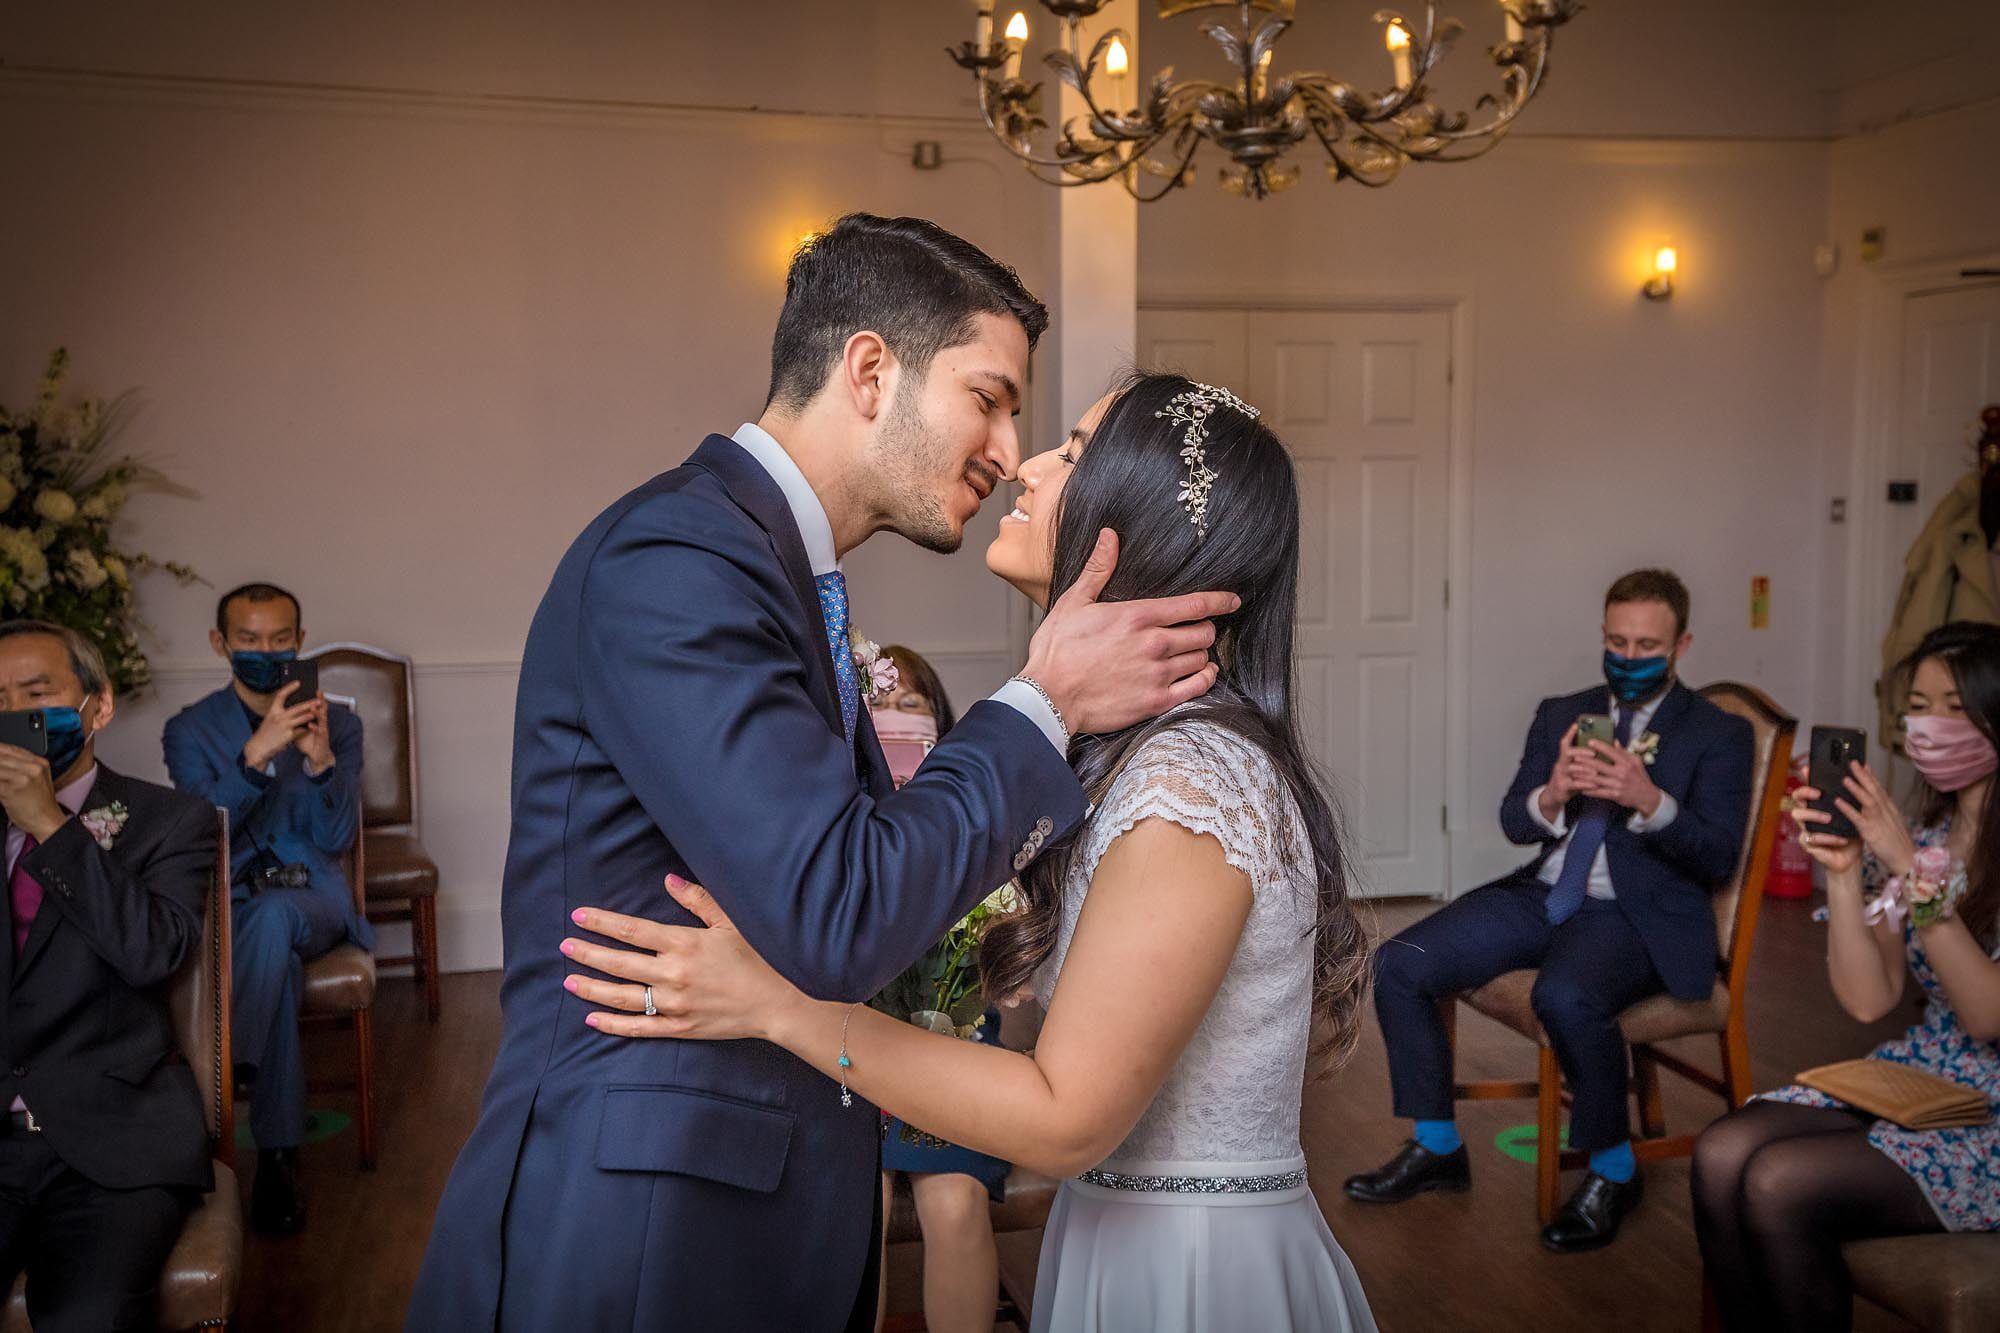 The couple have a tender first kiss at a London wedding